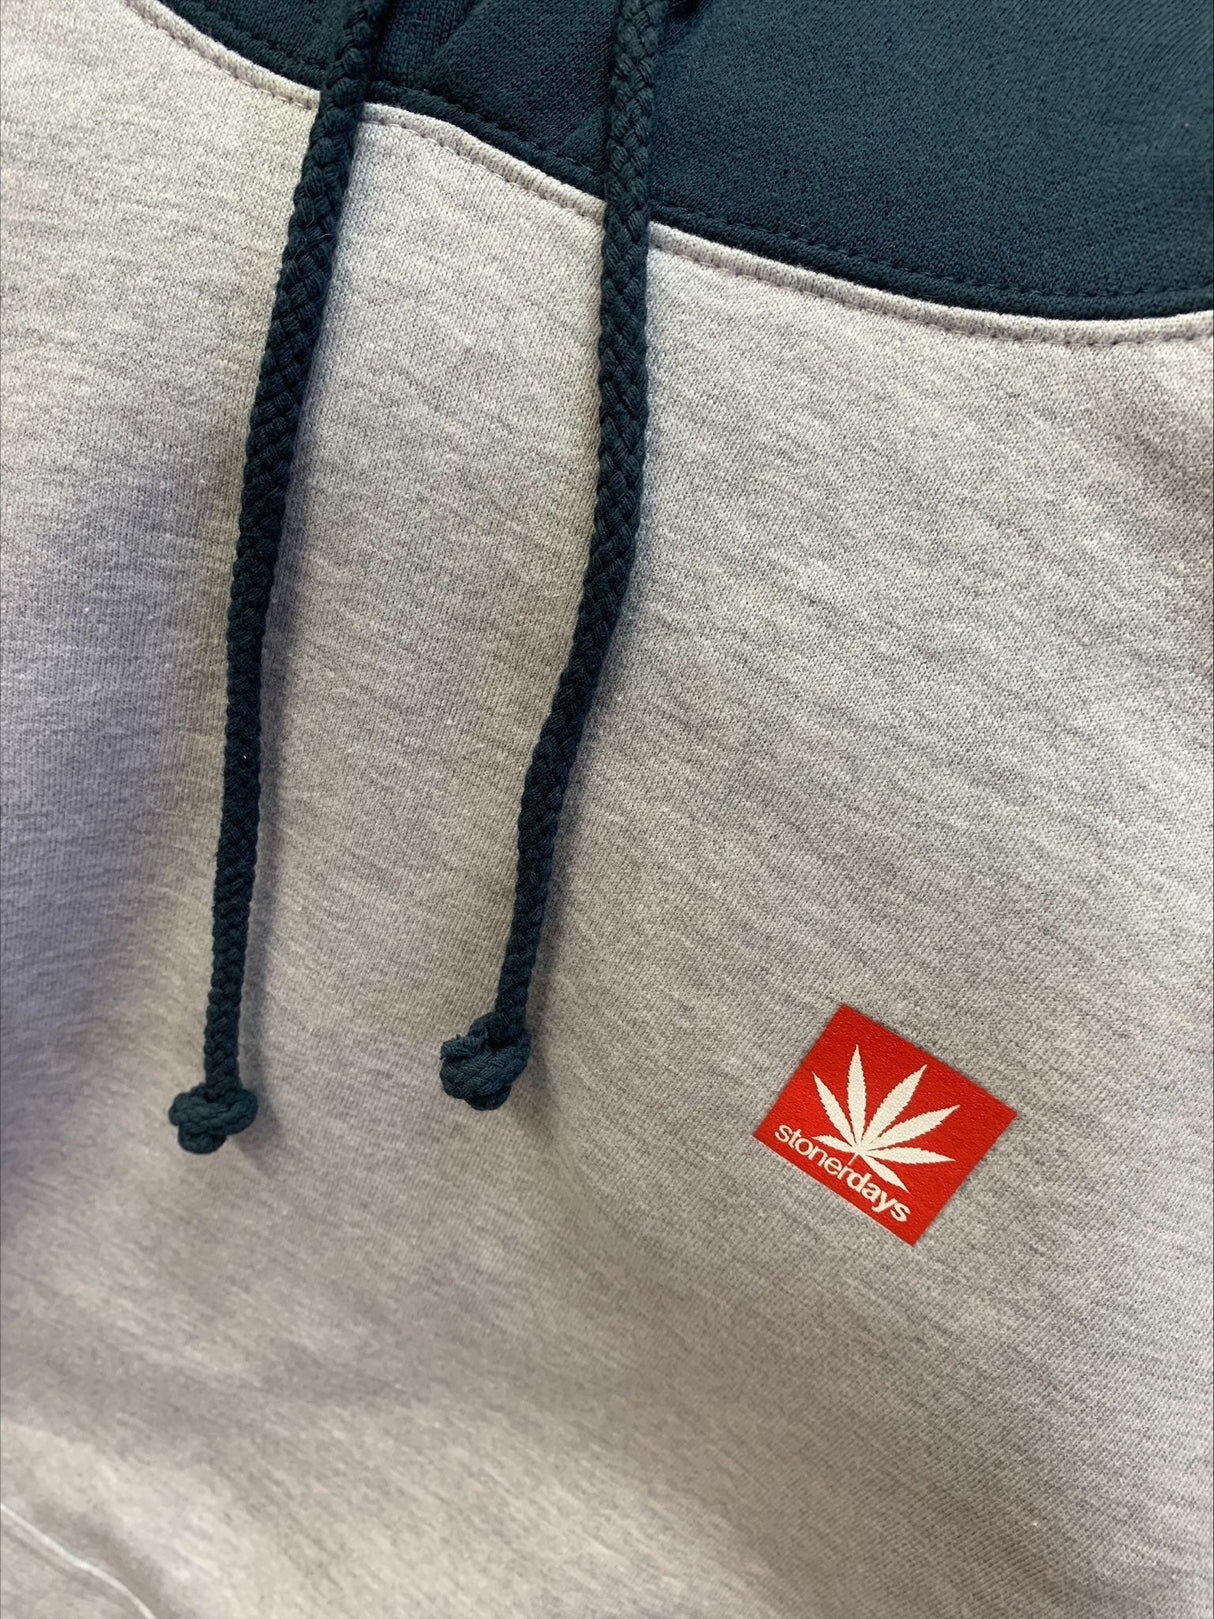 Close-up of StonerDays Two Tone Hoodie in small, showcasing the brand logo and drawstrings